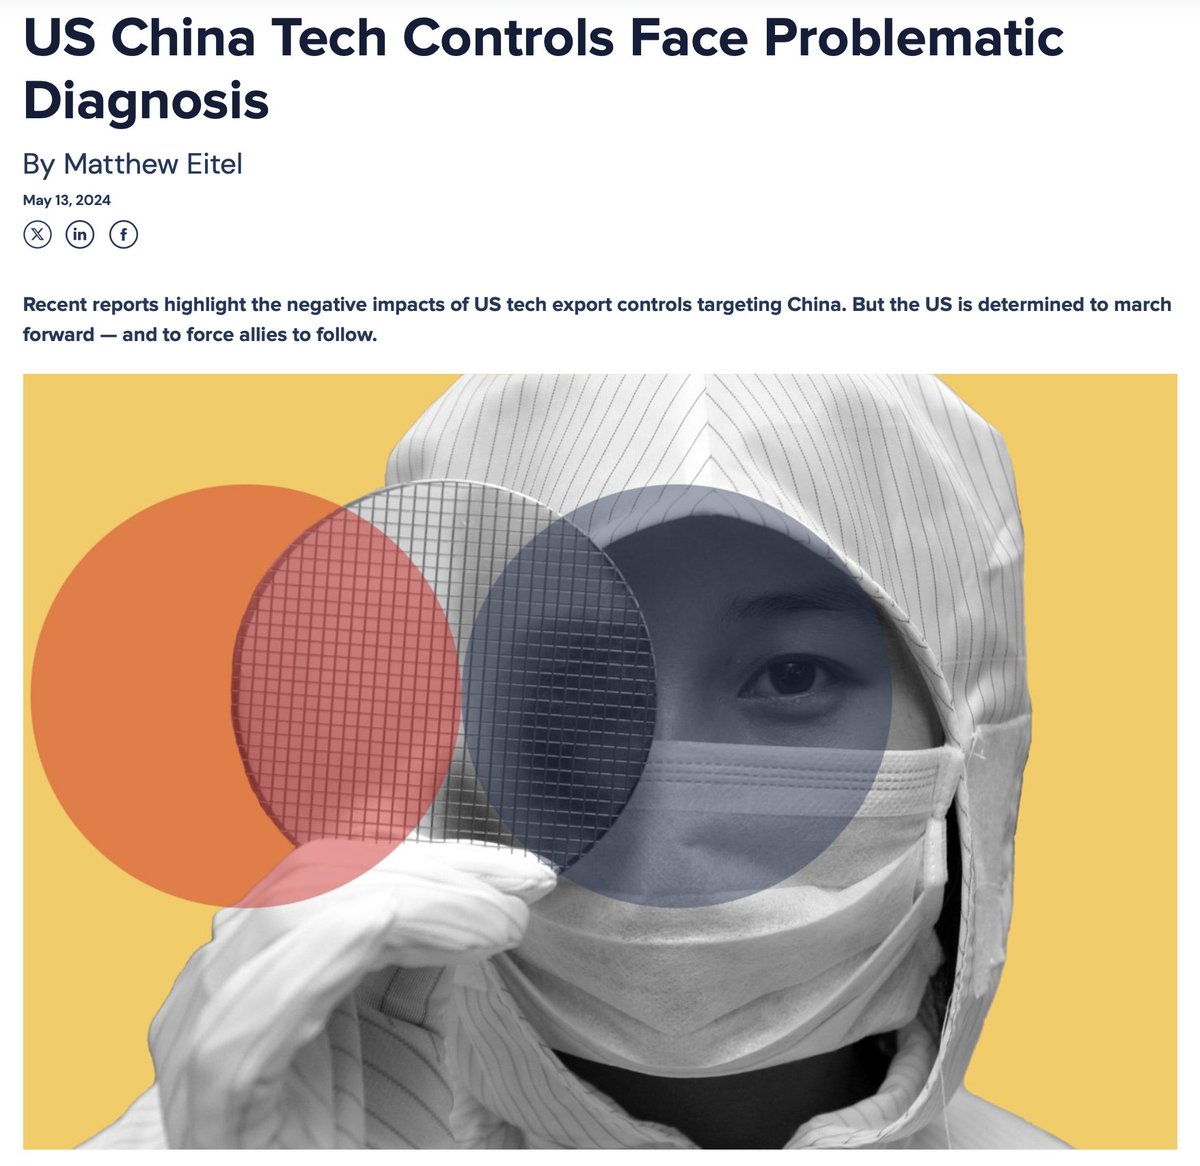 It doesn't look like US tech sanctions on China are working out so well according to this article by CEPA, here are some of the highlights: US export controls aim to maintain a technological lead over China in semiconductors, but two new studies indicate these measures are